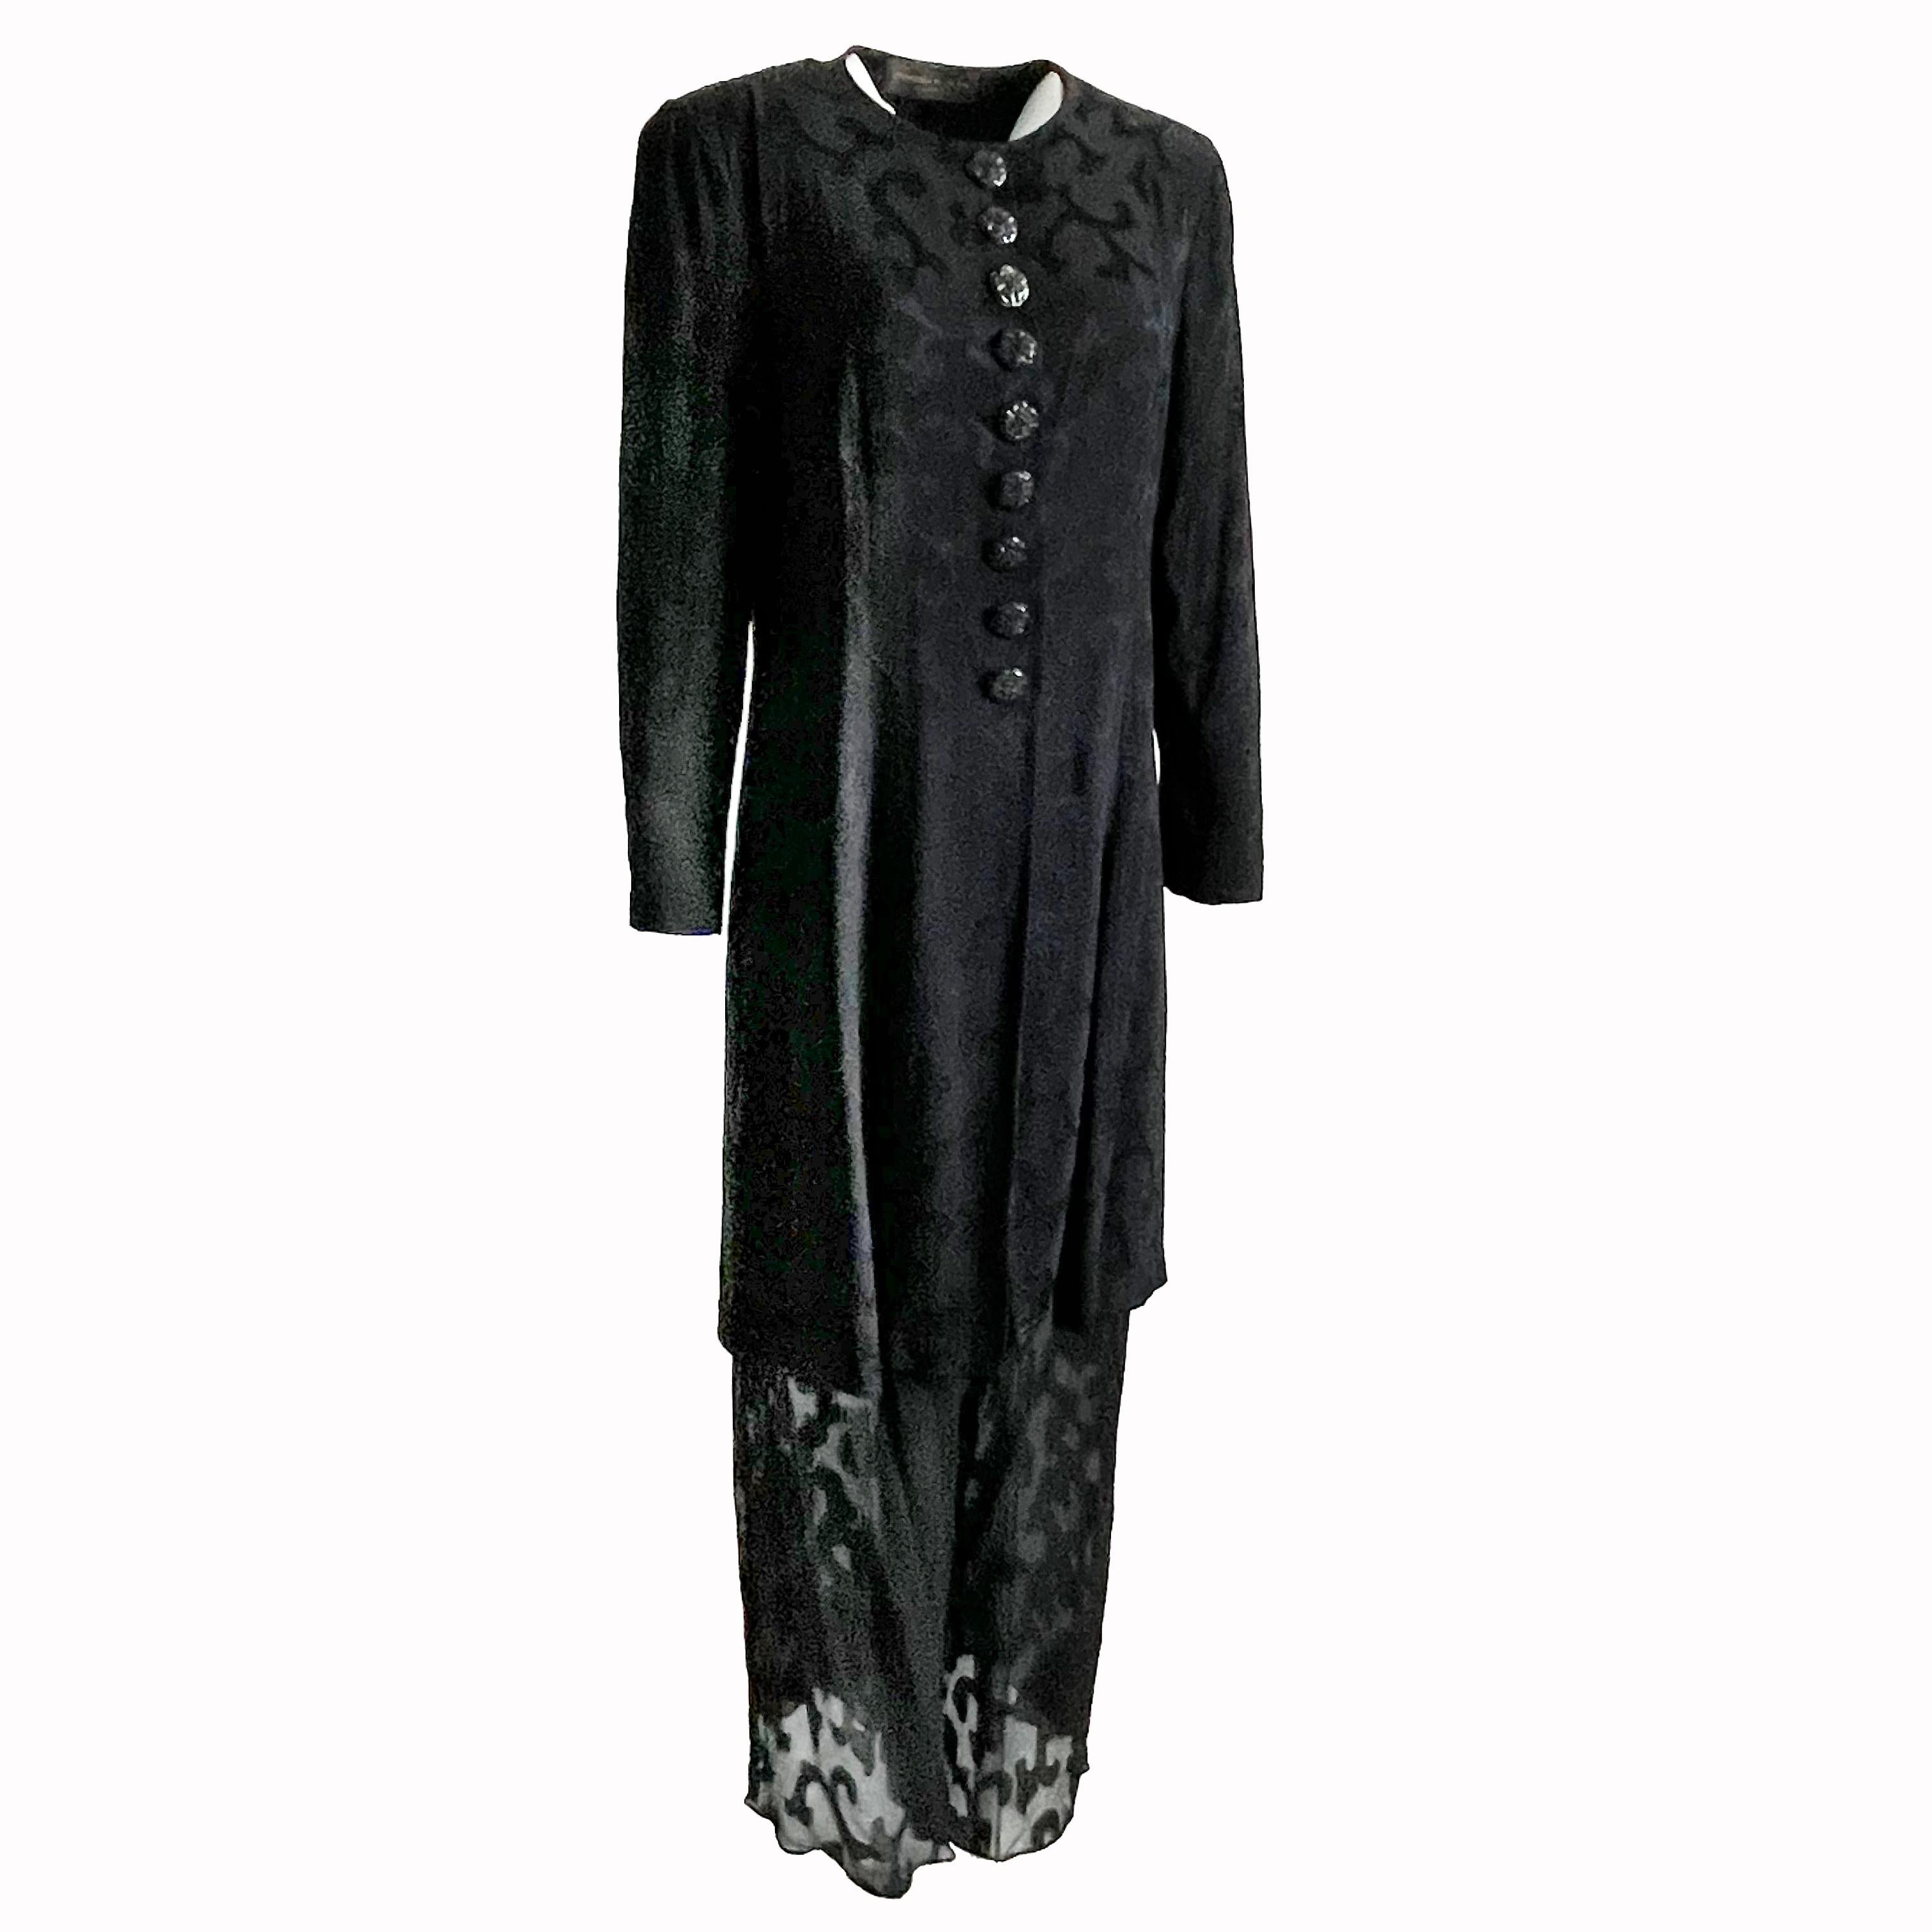 Here's a chic two-piece jacket and pants set from Donna Karan New York, and sold by high end luxury retail center LEONE in British Columbia, most likely in the 1990s. Made from black silk, the jacket features a floral brocade pattern throughout with